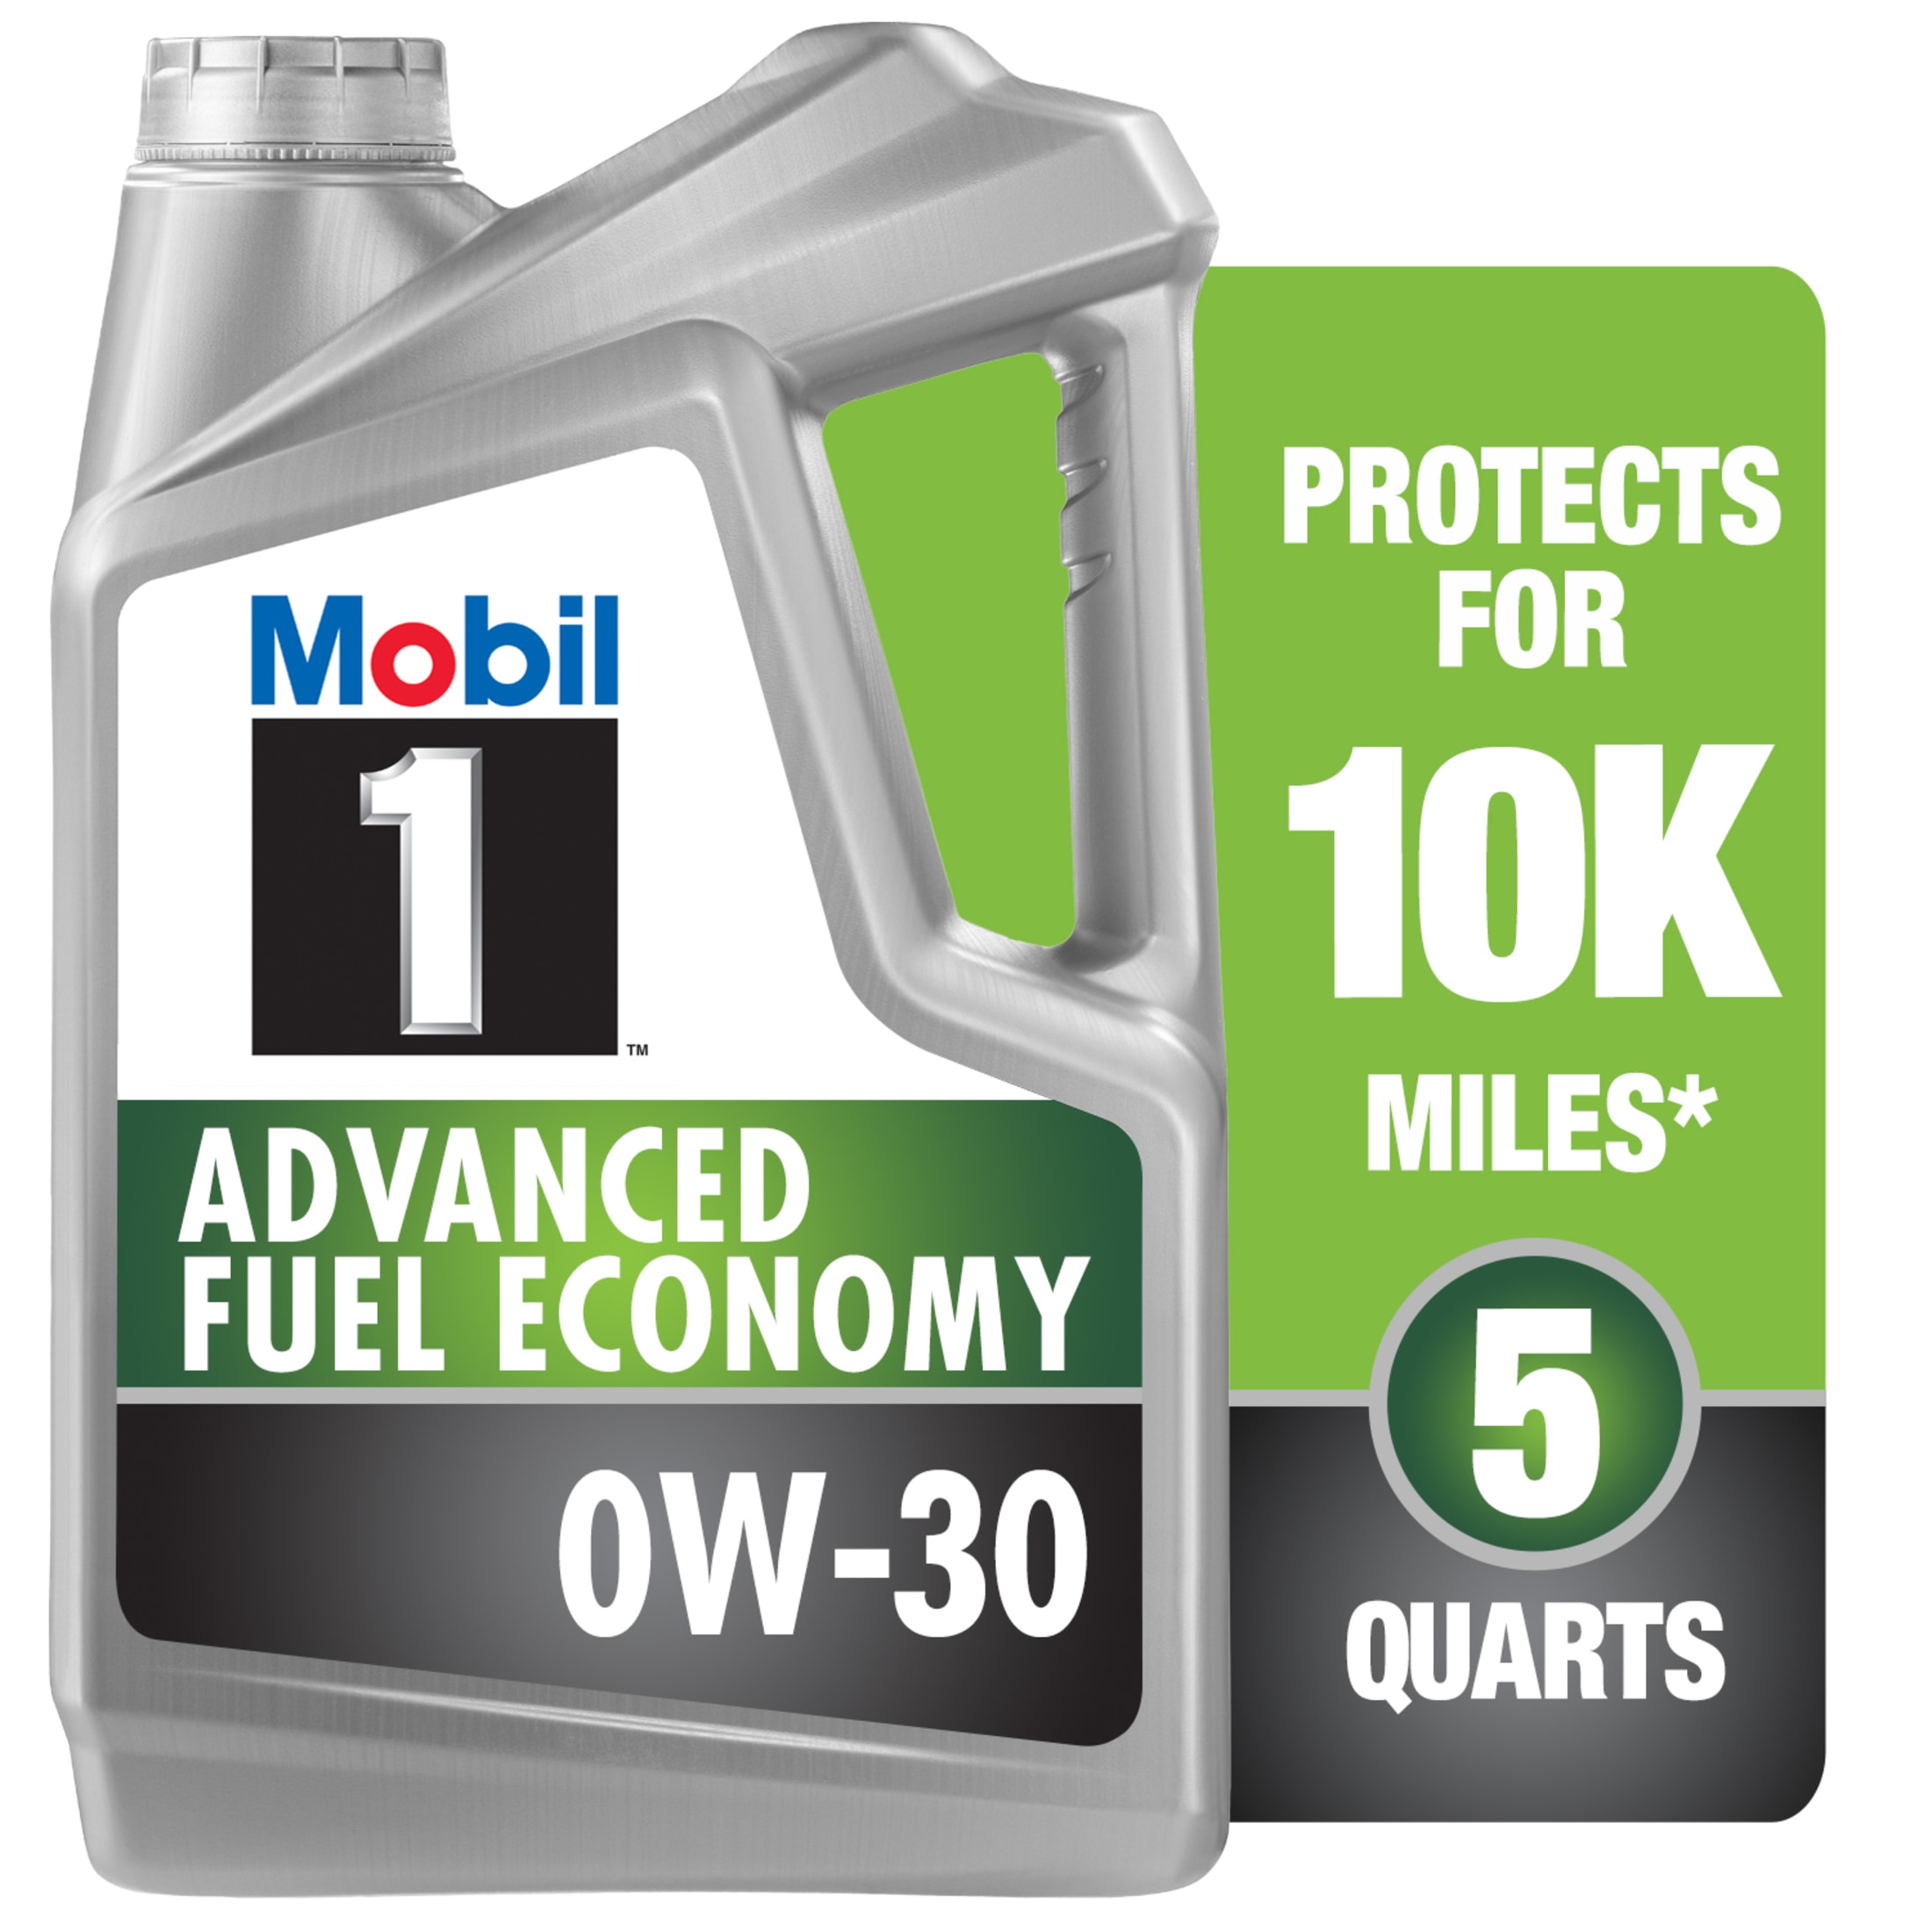 Mobil 1 Advanced Fuel Economy Full Synthetic Motor Oil 0W-30, 5 Quart - image 3 of 9